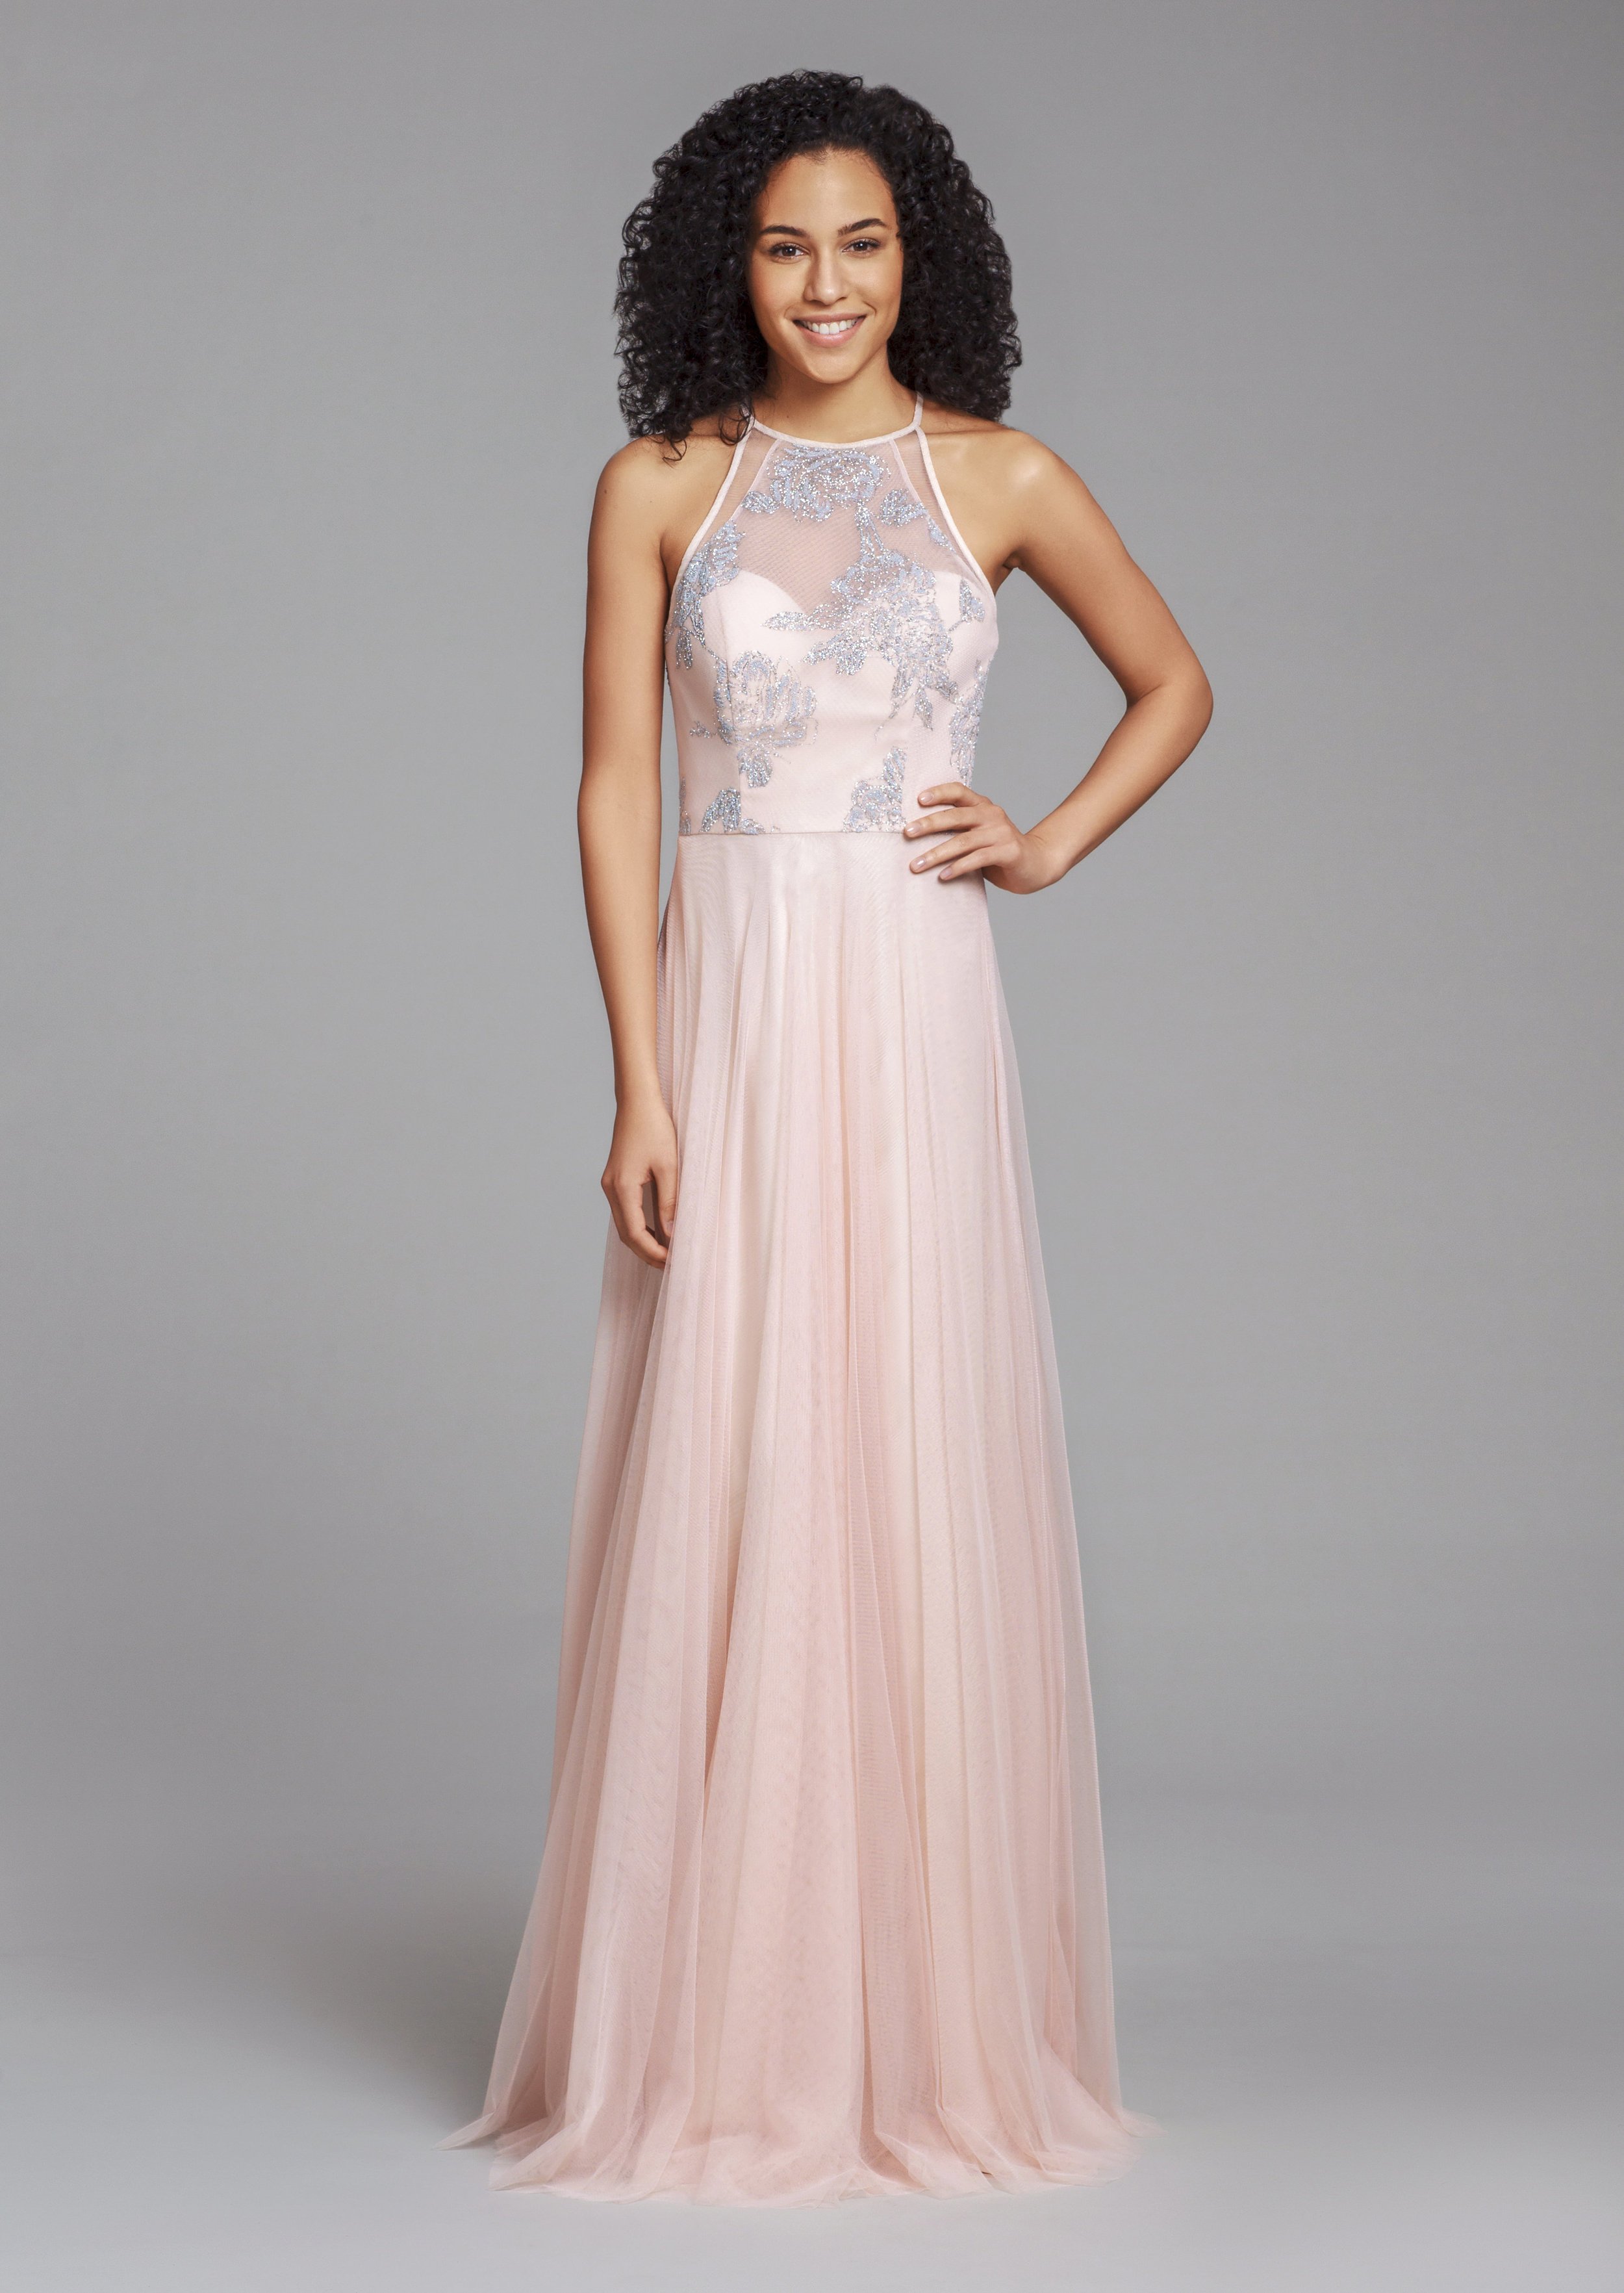 hayley-paige-occasions-bridesmaids-fall-2018-style-5851.jpg